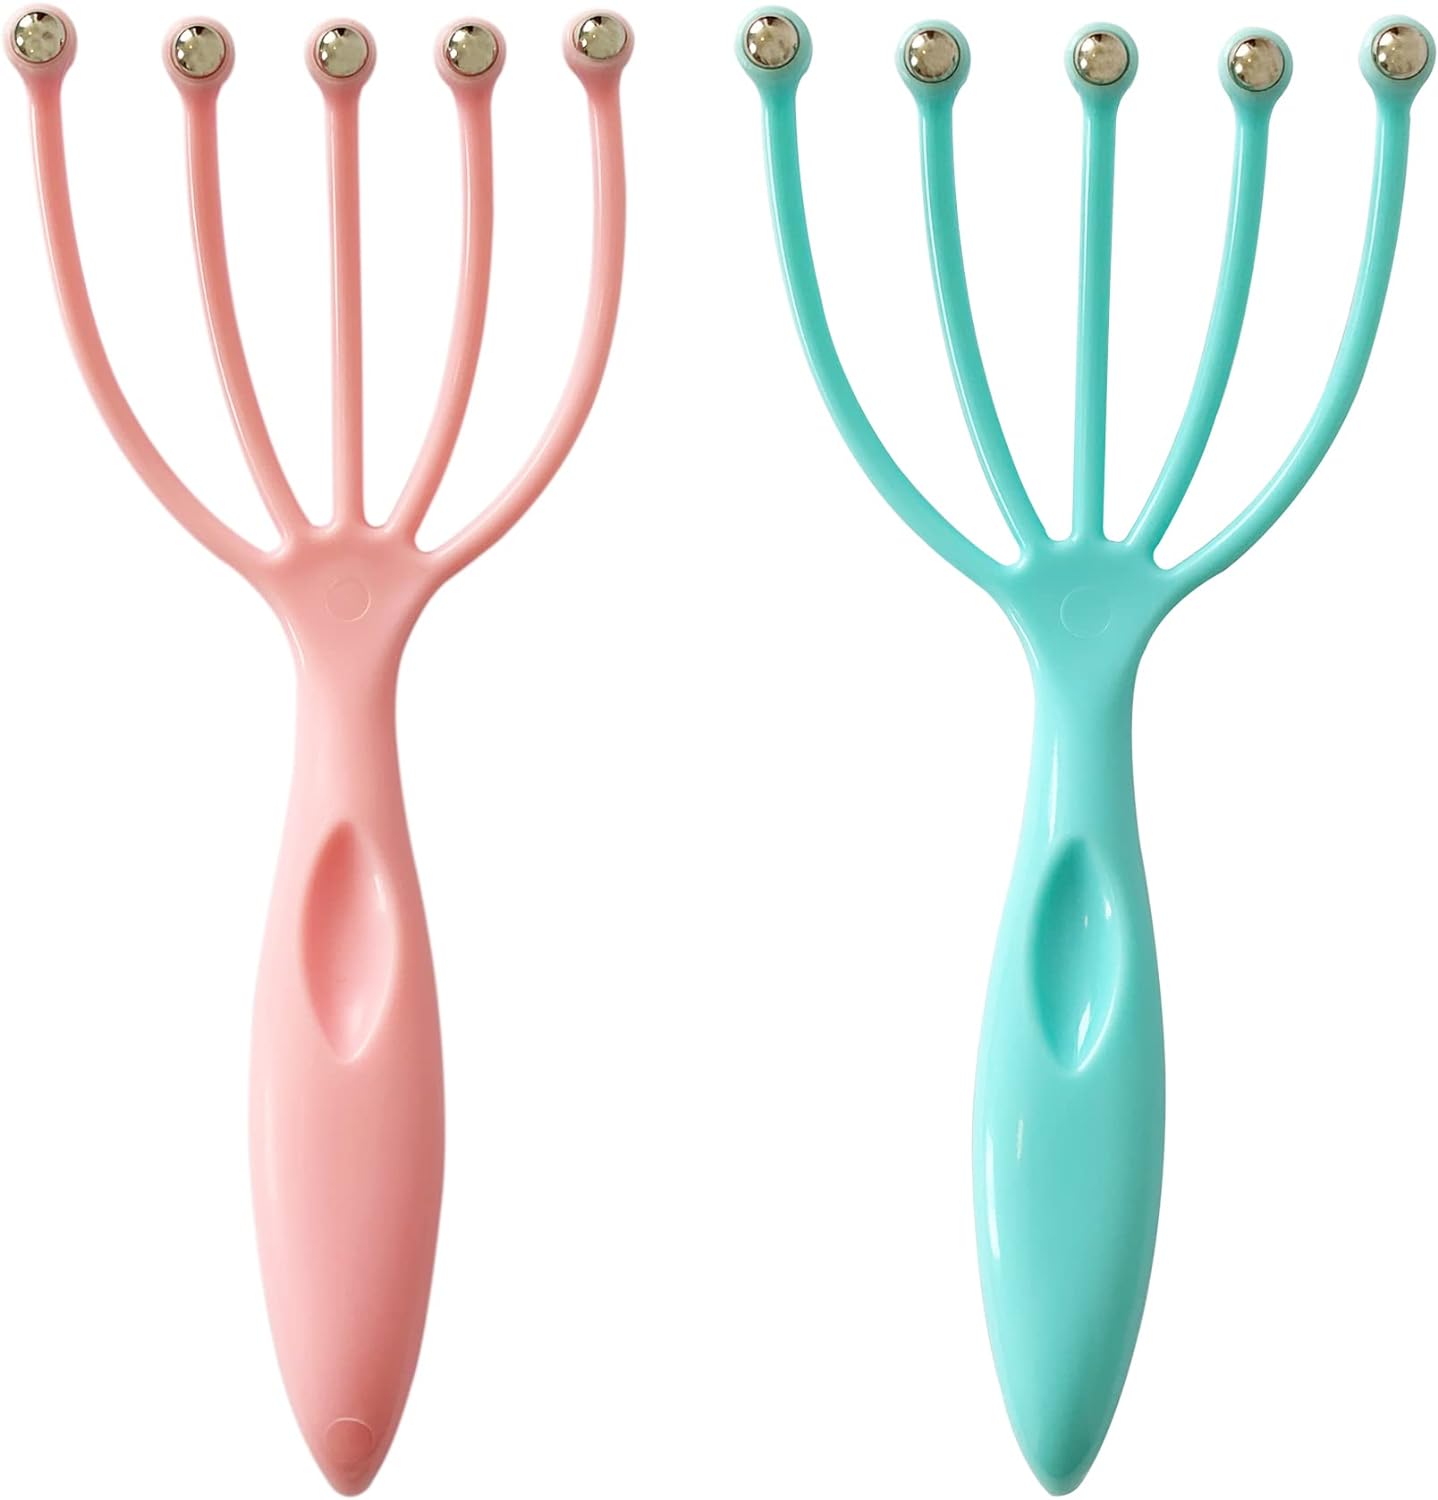 Kallaudo Hand Held Scalp Massager, Head Massager for Deep Relaxation & Stress Reduction in The Office Home SPA Pink+Blue(2-Pack)